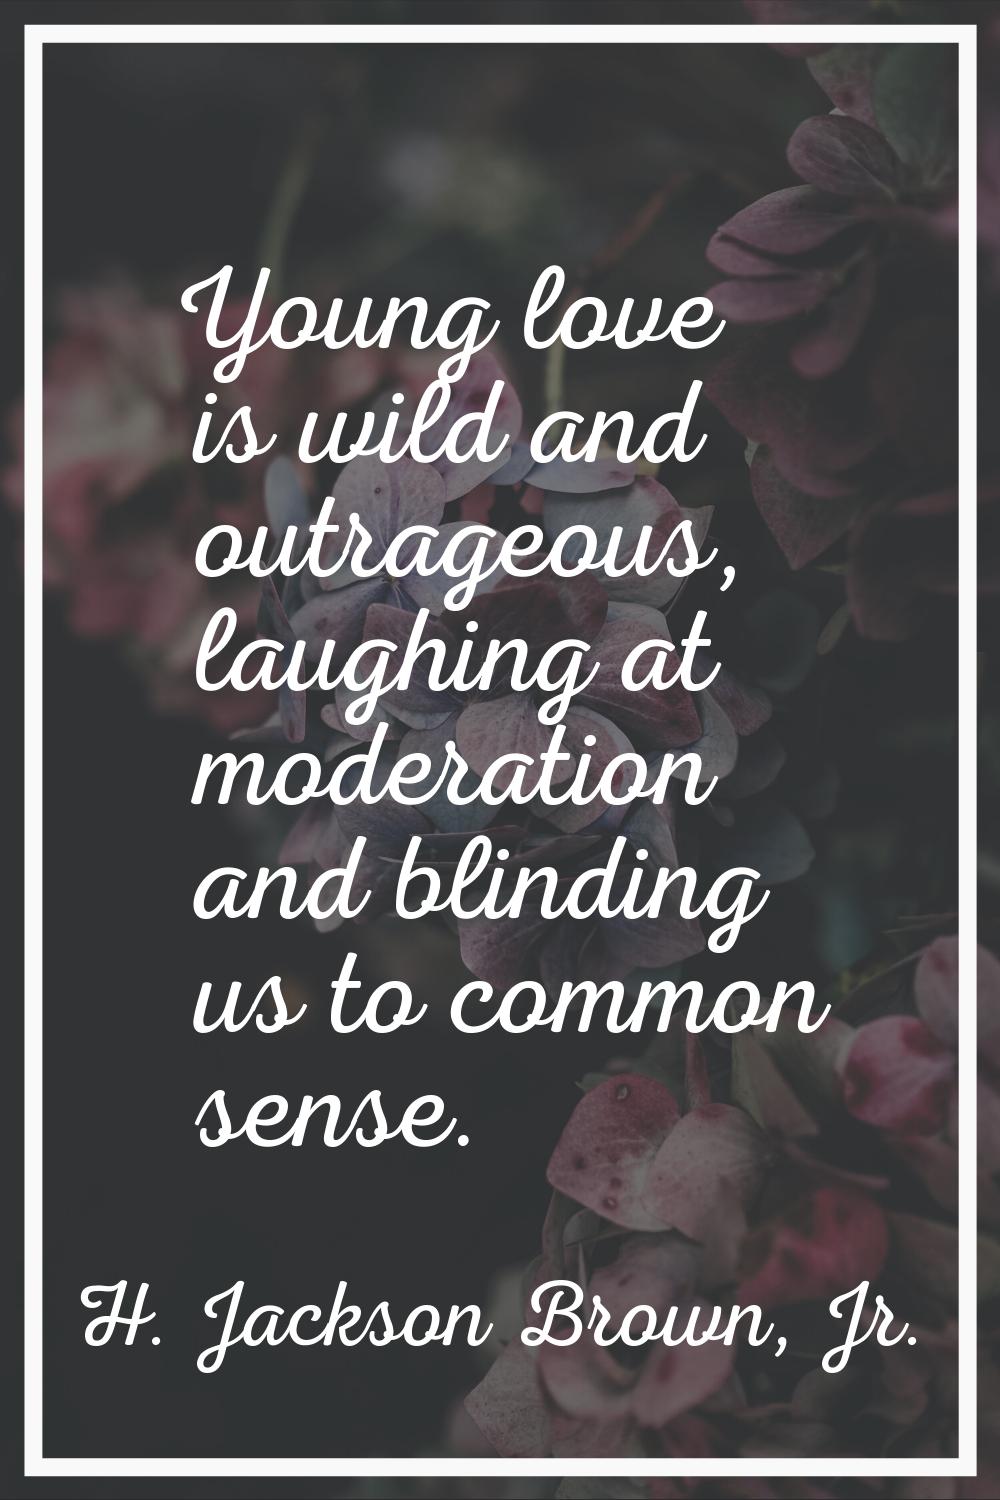 Young love is wild and outrageous, laughing at moderation and blinding us to common sense.